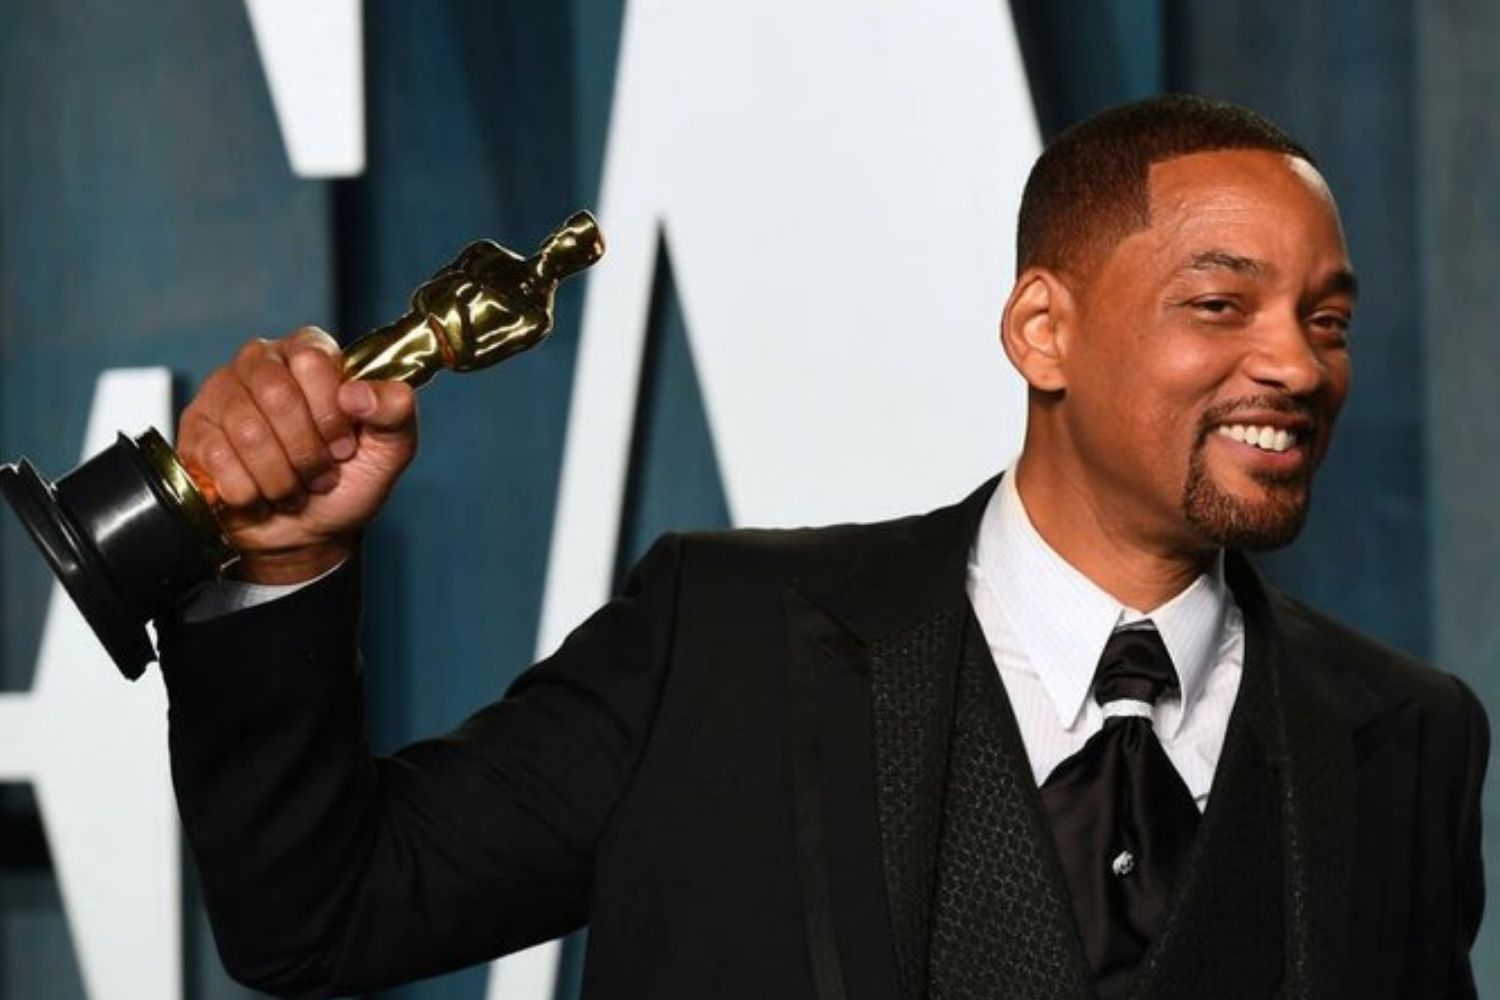 Should Will Smith be allowed to keep his Oscar after the Chris Rock slap?